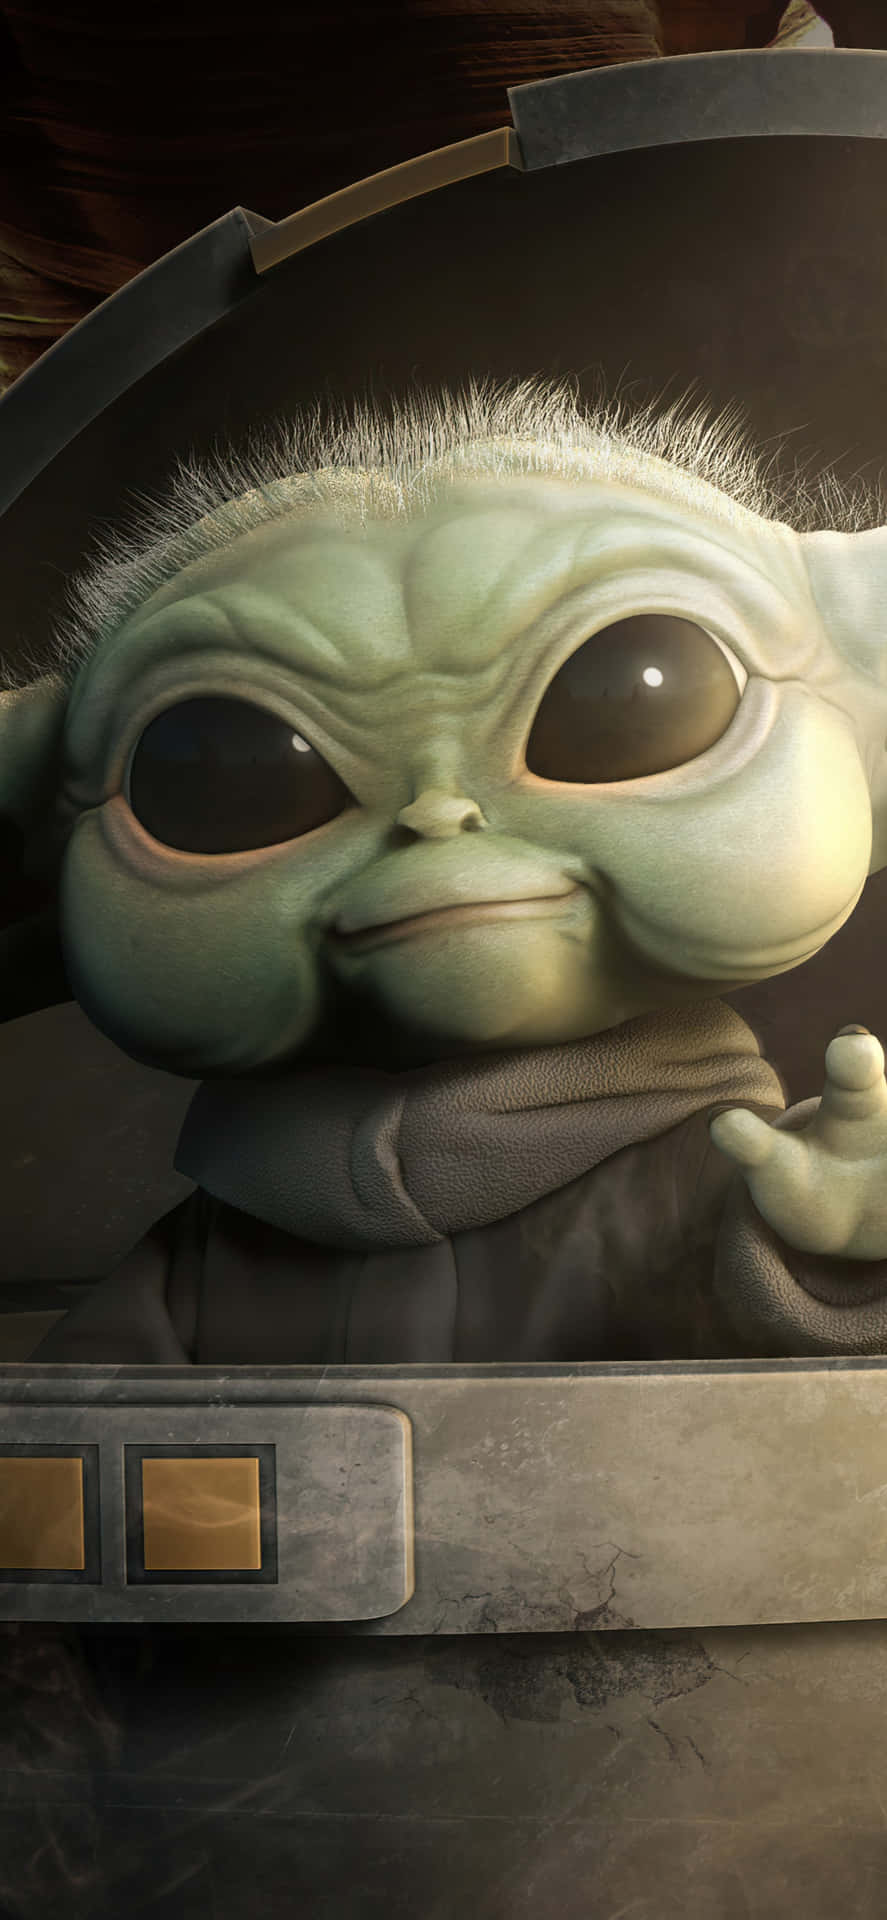 "Cuddle with the Baby Yoda Phone and keep your special memories safe" Wallpaper